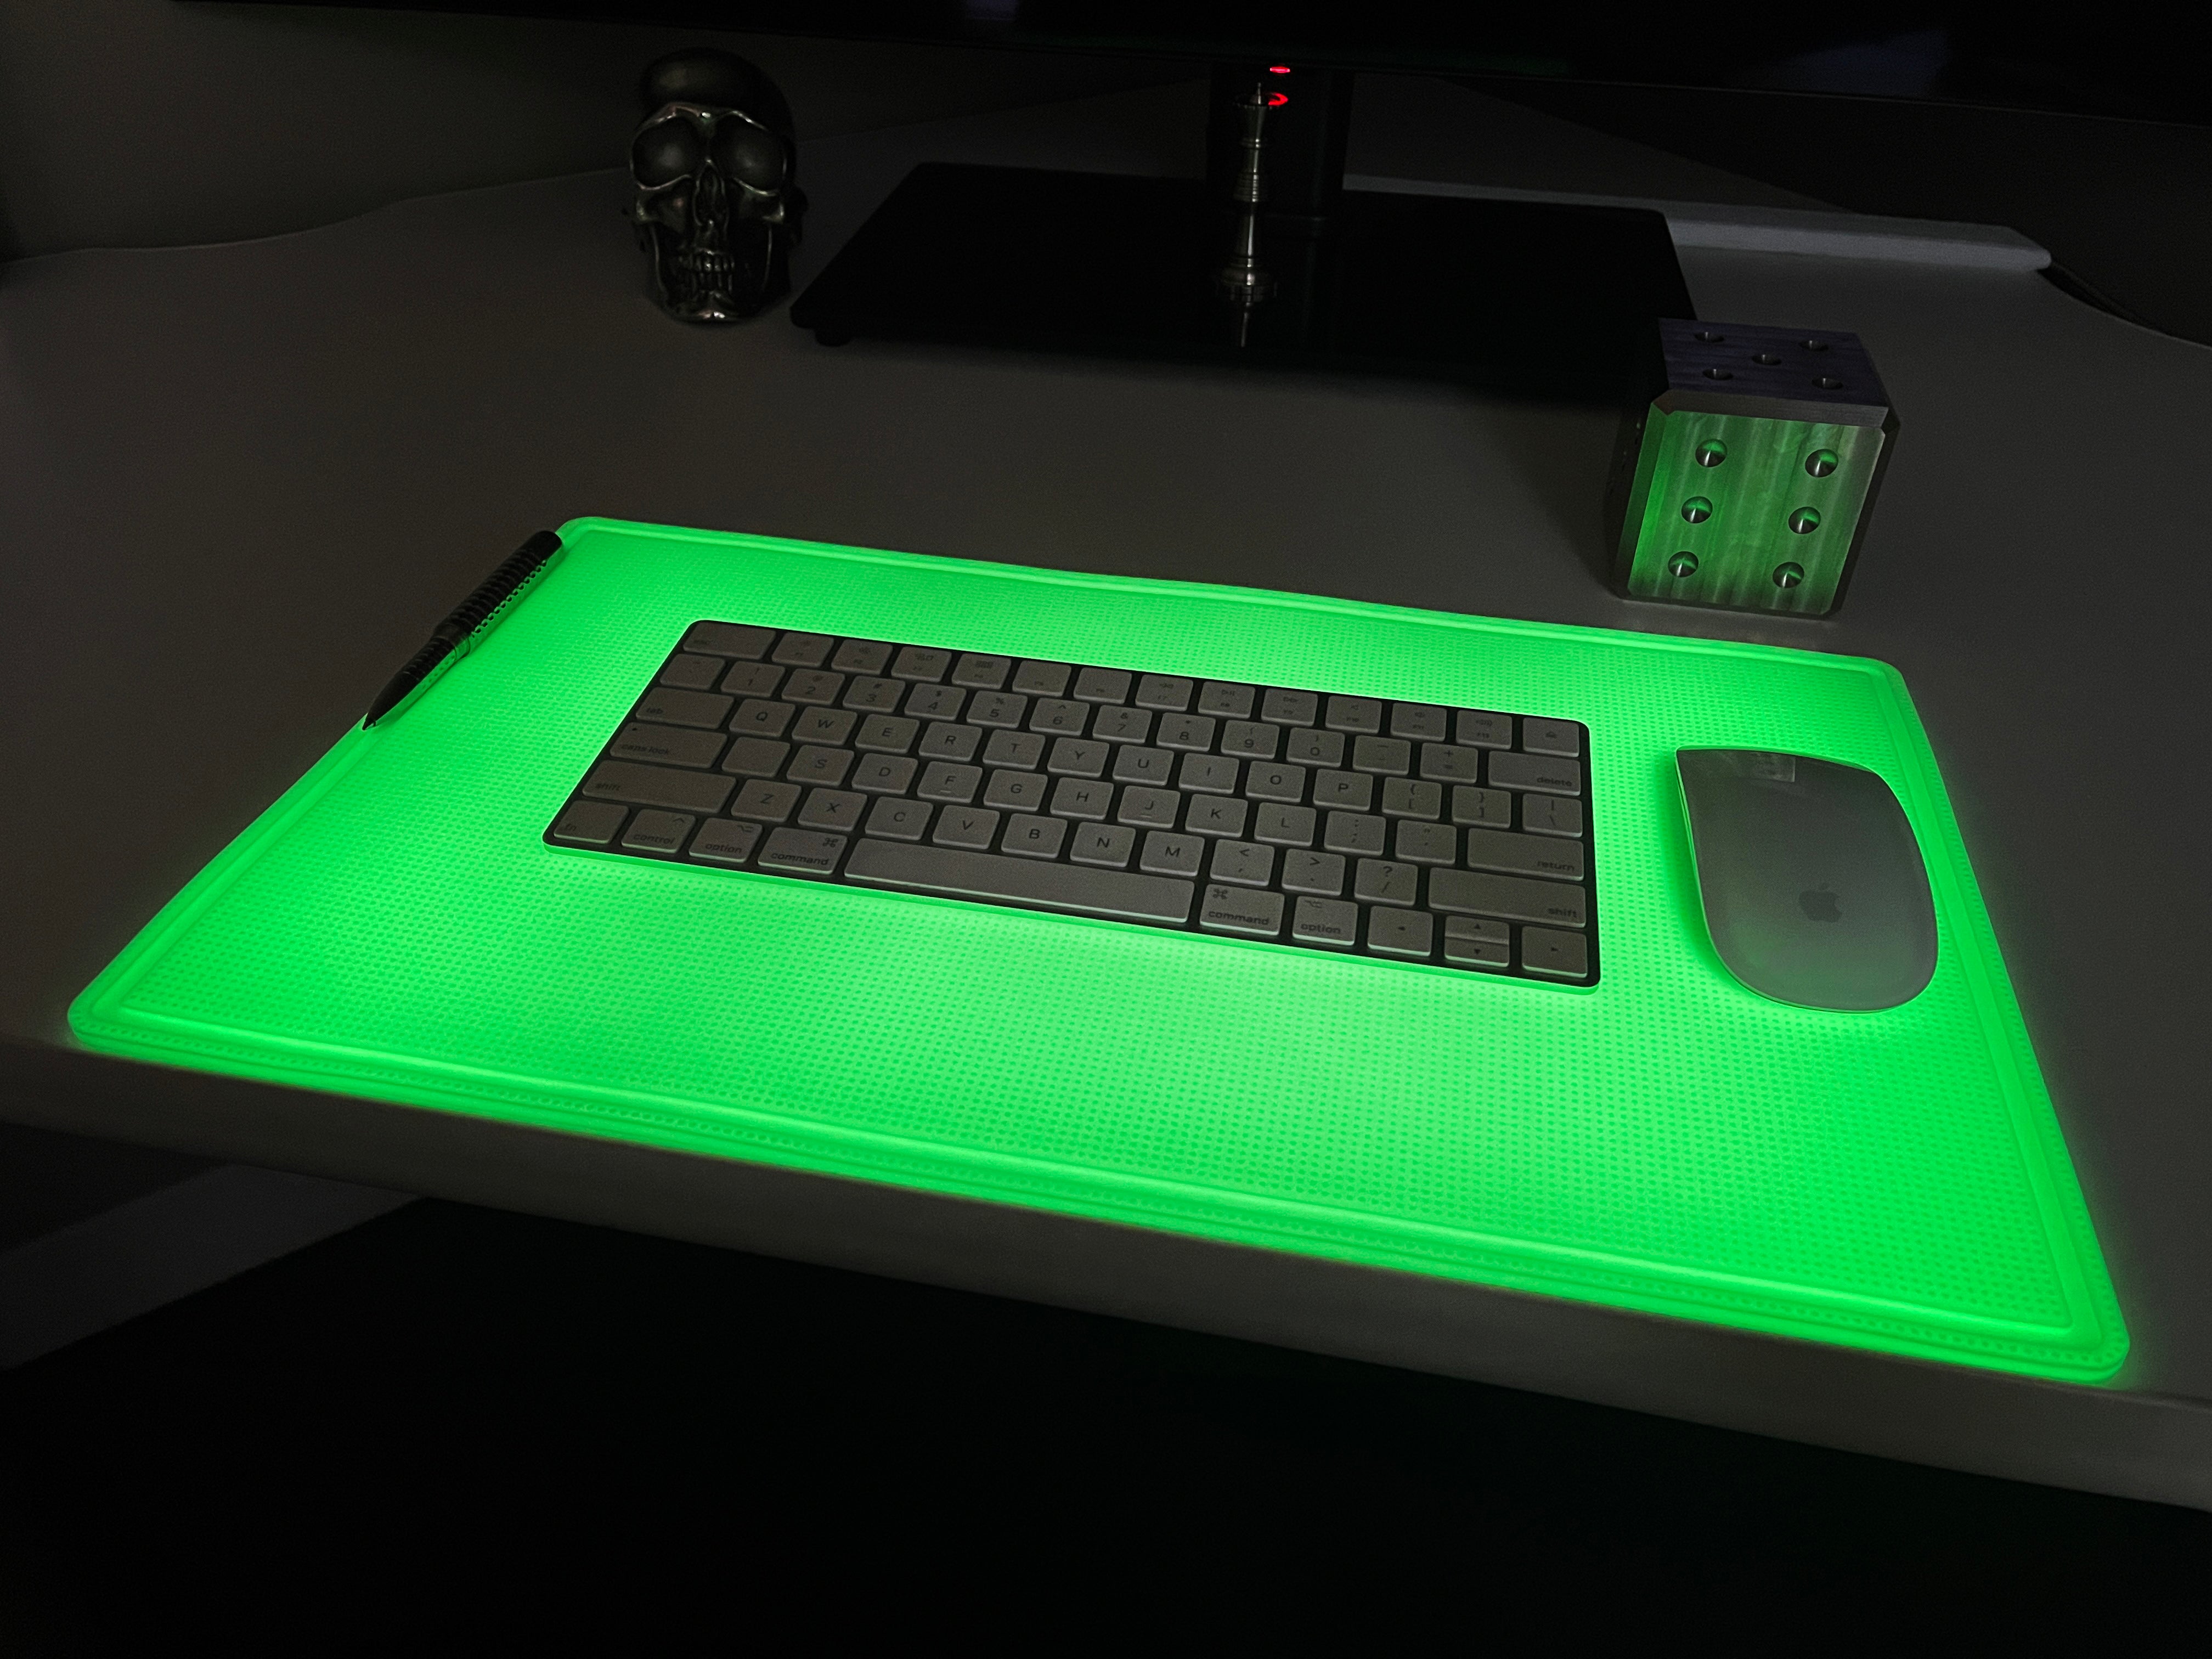 Glow - Awesome Roll Up - Non Slip Project Mat